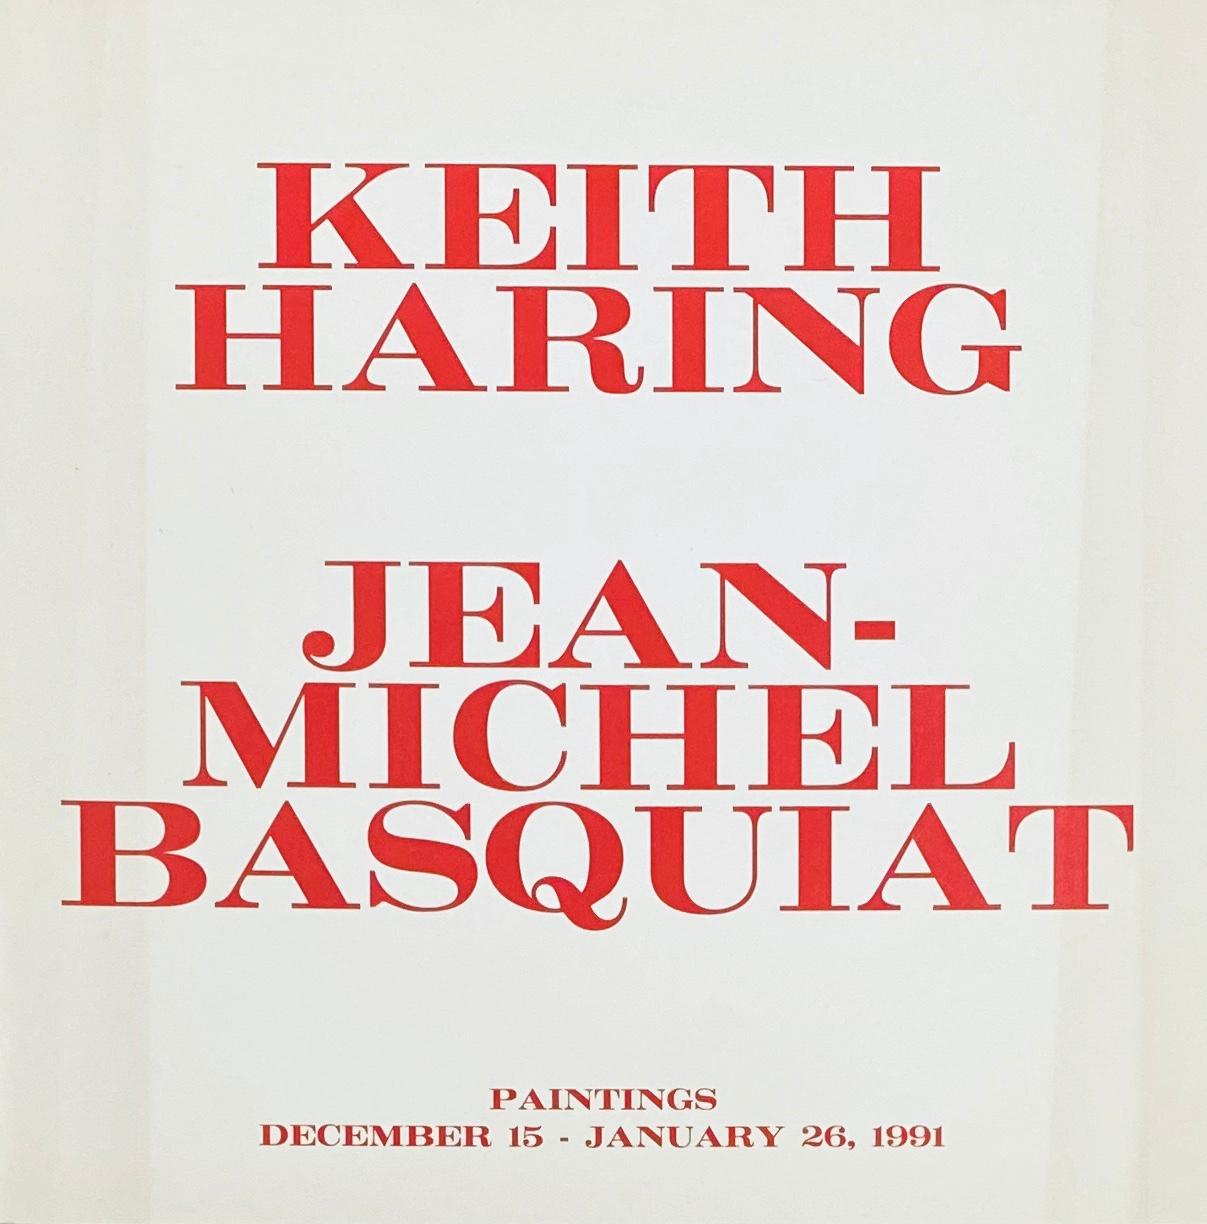 Jean-Michel Basquiat Keith Haring at Tony Shafrazi 1990/1991 (announcement) - Art by after Jean-Michel Basquiat